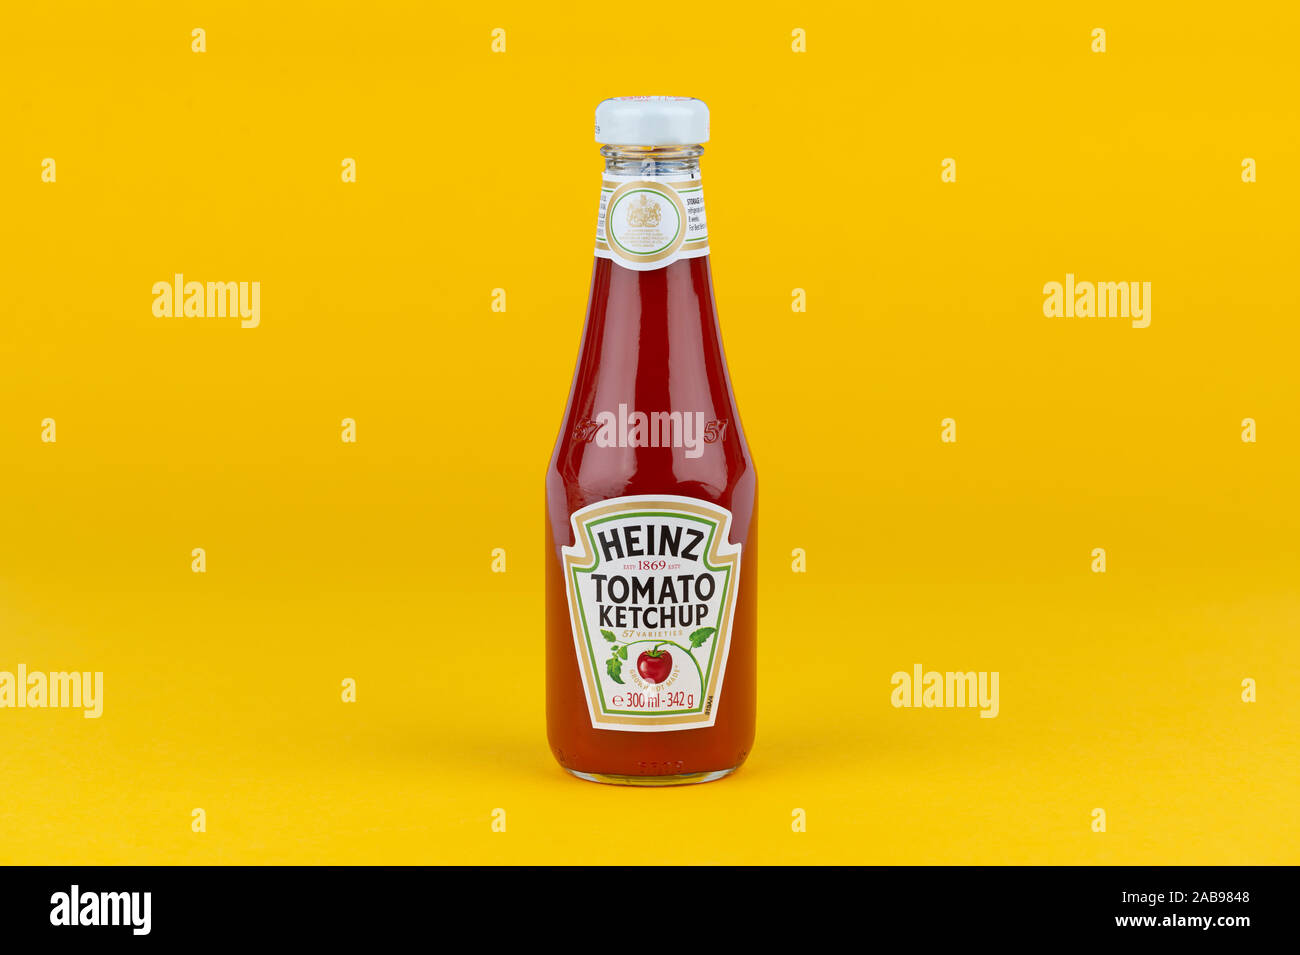 A bottle of Heinz Tomato Ketchup shot on a yellow background. Stock Photo